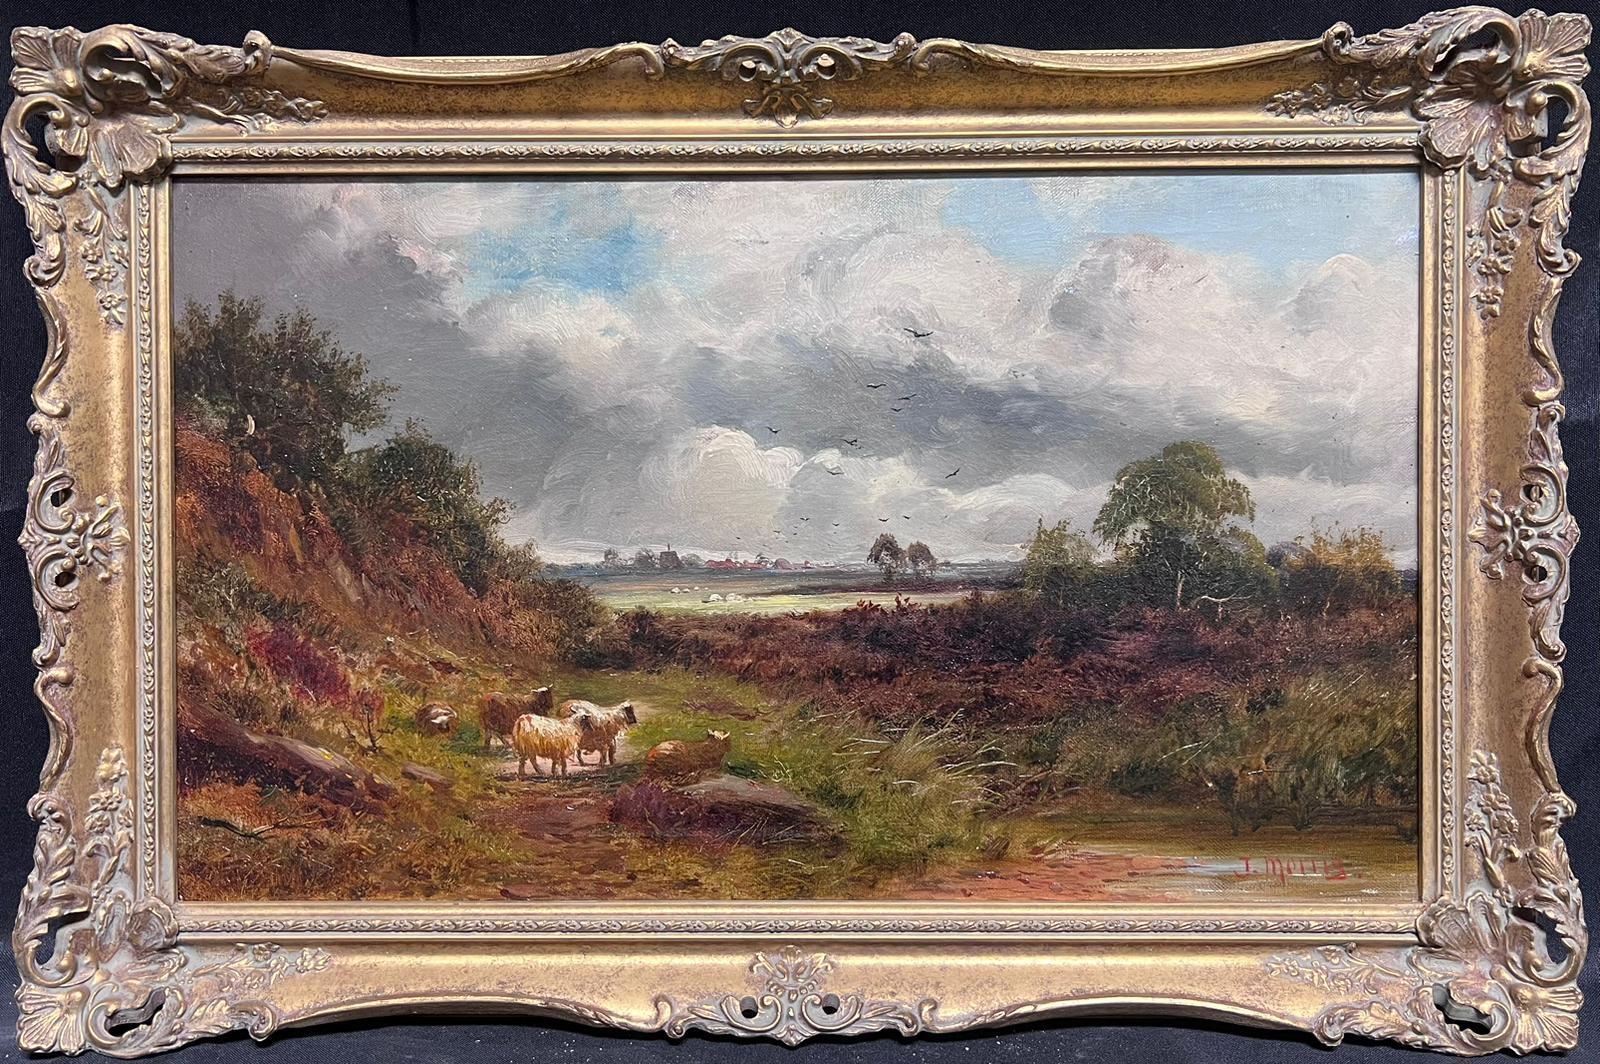 J. Morris Landscape Painting - Fine Victorian Signed Oil Painting Pastoral Landscape with Sheep Brooding Skies